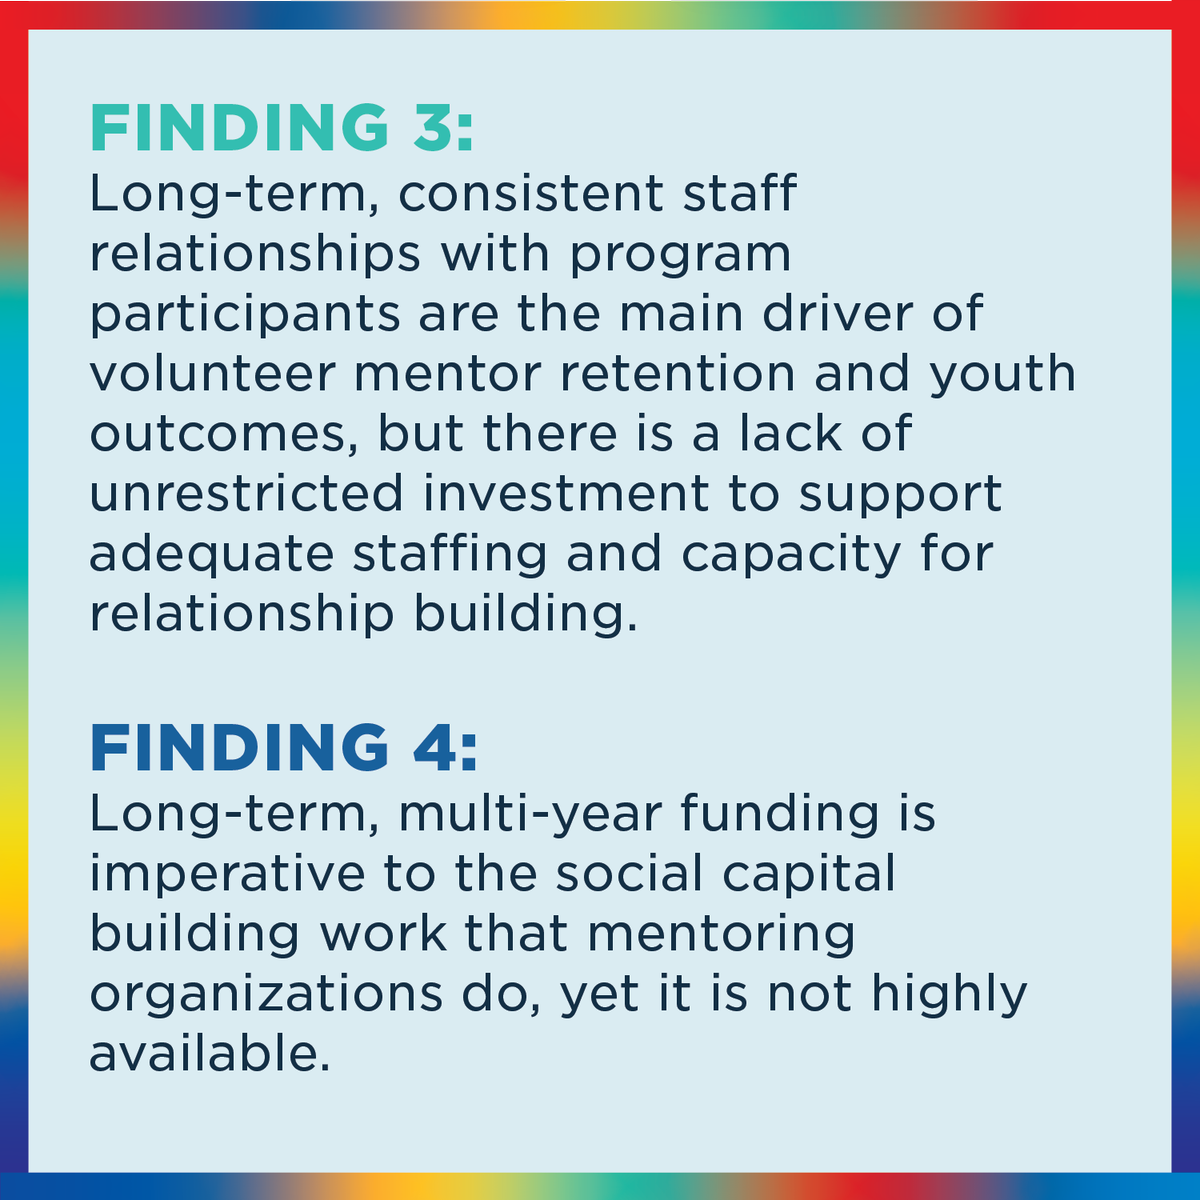 For funders committed to supporting young people, working w/ youth-serving nonprofits is key. MENTOR's newest report sheds light on the value of quality staff, multi-year funding & equitable grant applications. Explore: mentoring.org/philanthropic-… #MentoringAmplifies @ASA_Impact